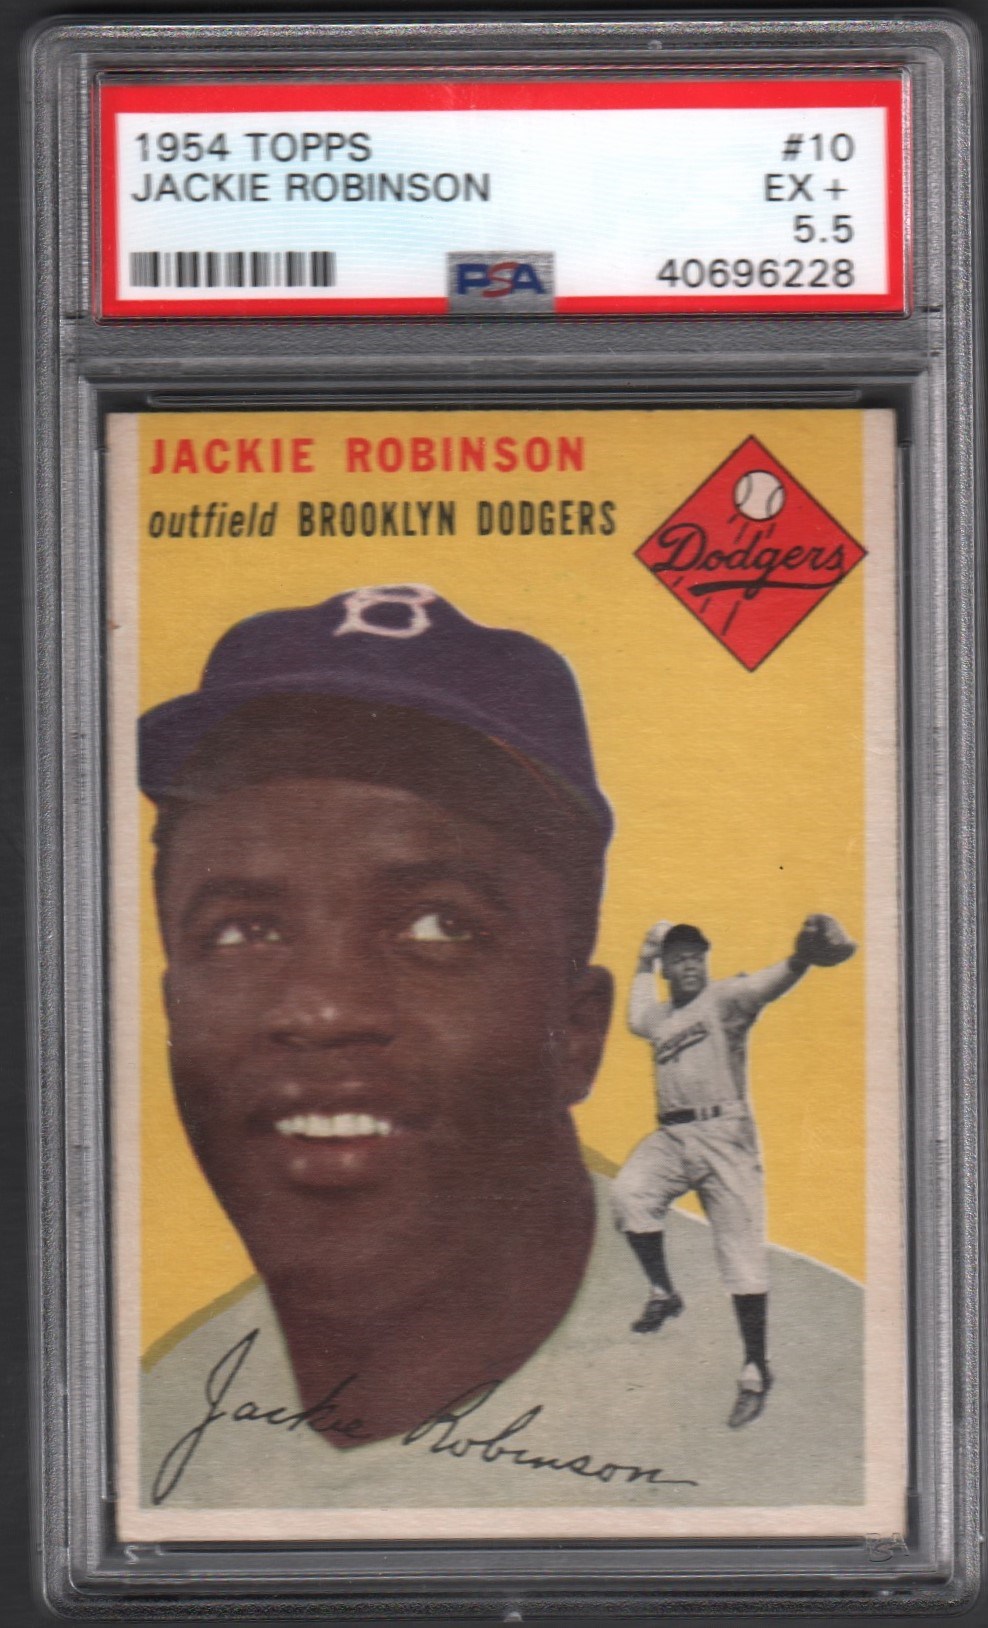 Baseball and Trading Cards - 1954 and 1955 Topps Jackie Robinson PSA Graded Cards (2)